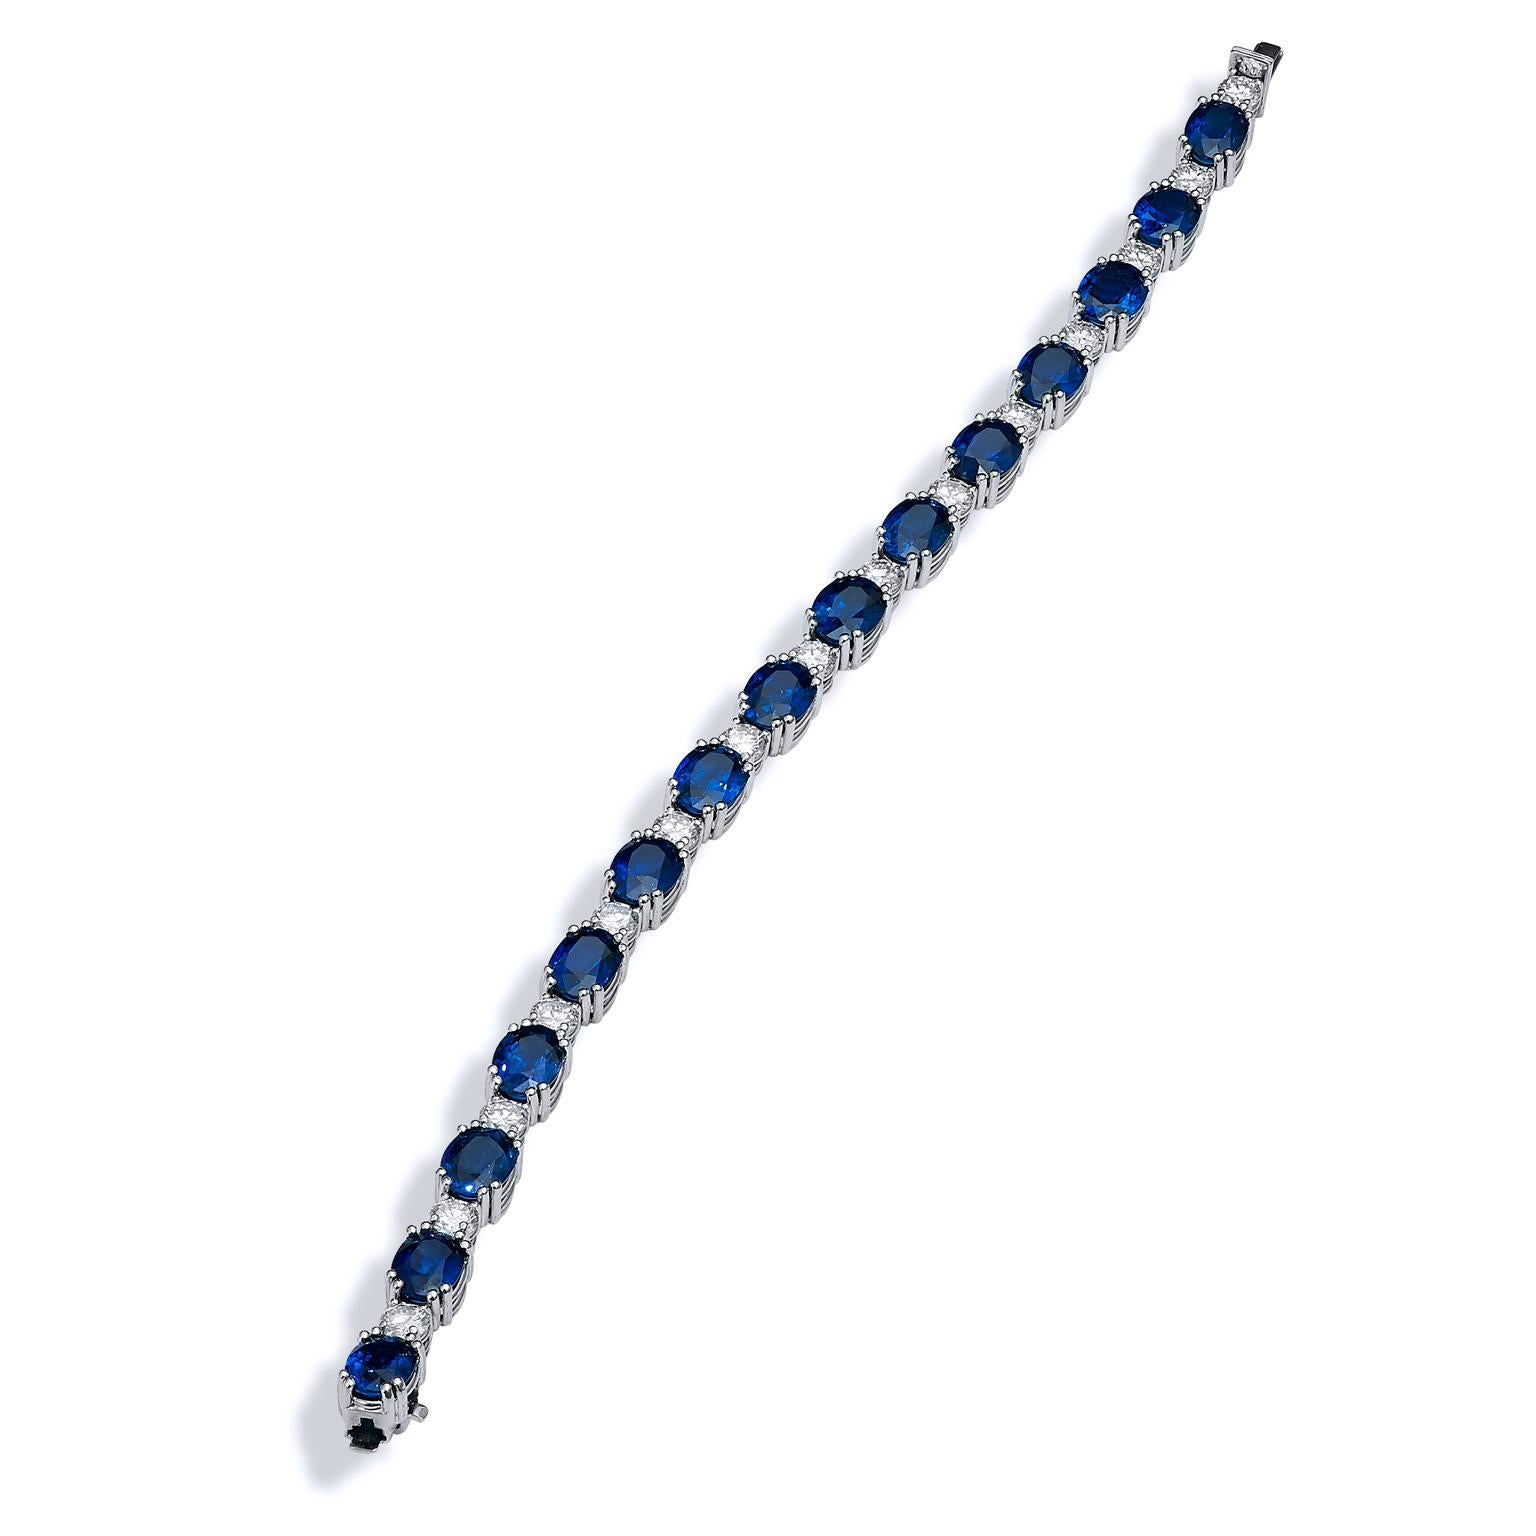 Royal Blue Sapphire and Diamond Tennis Bracelet 

The sapphire has long been beloved for its stunning blue hues and its celestial associations. A dream gemstone for jewelers, the sapphire offers some of the most breathtaking color hues.

Handmade by